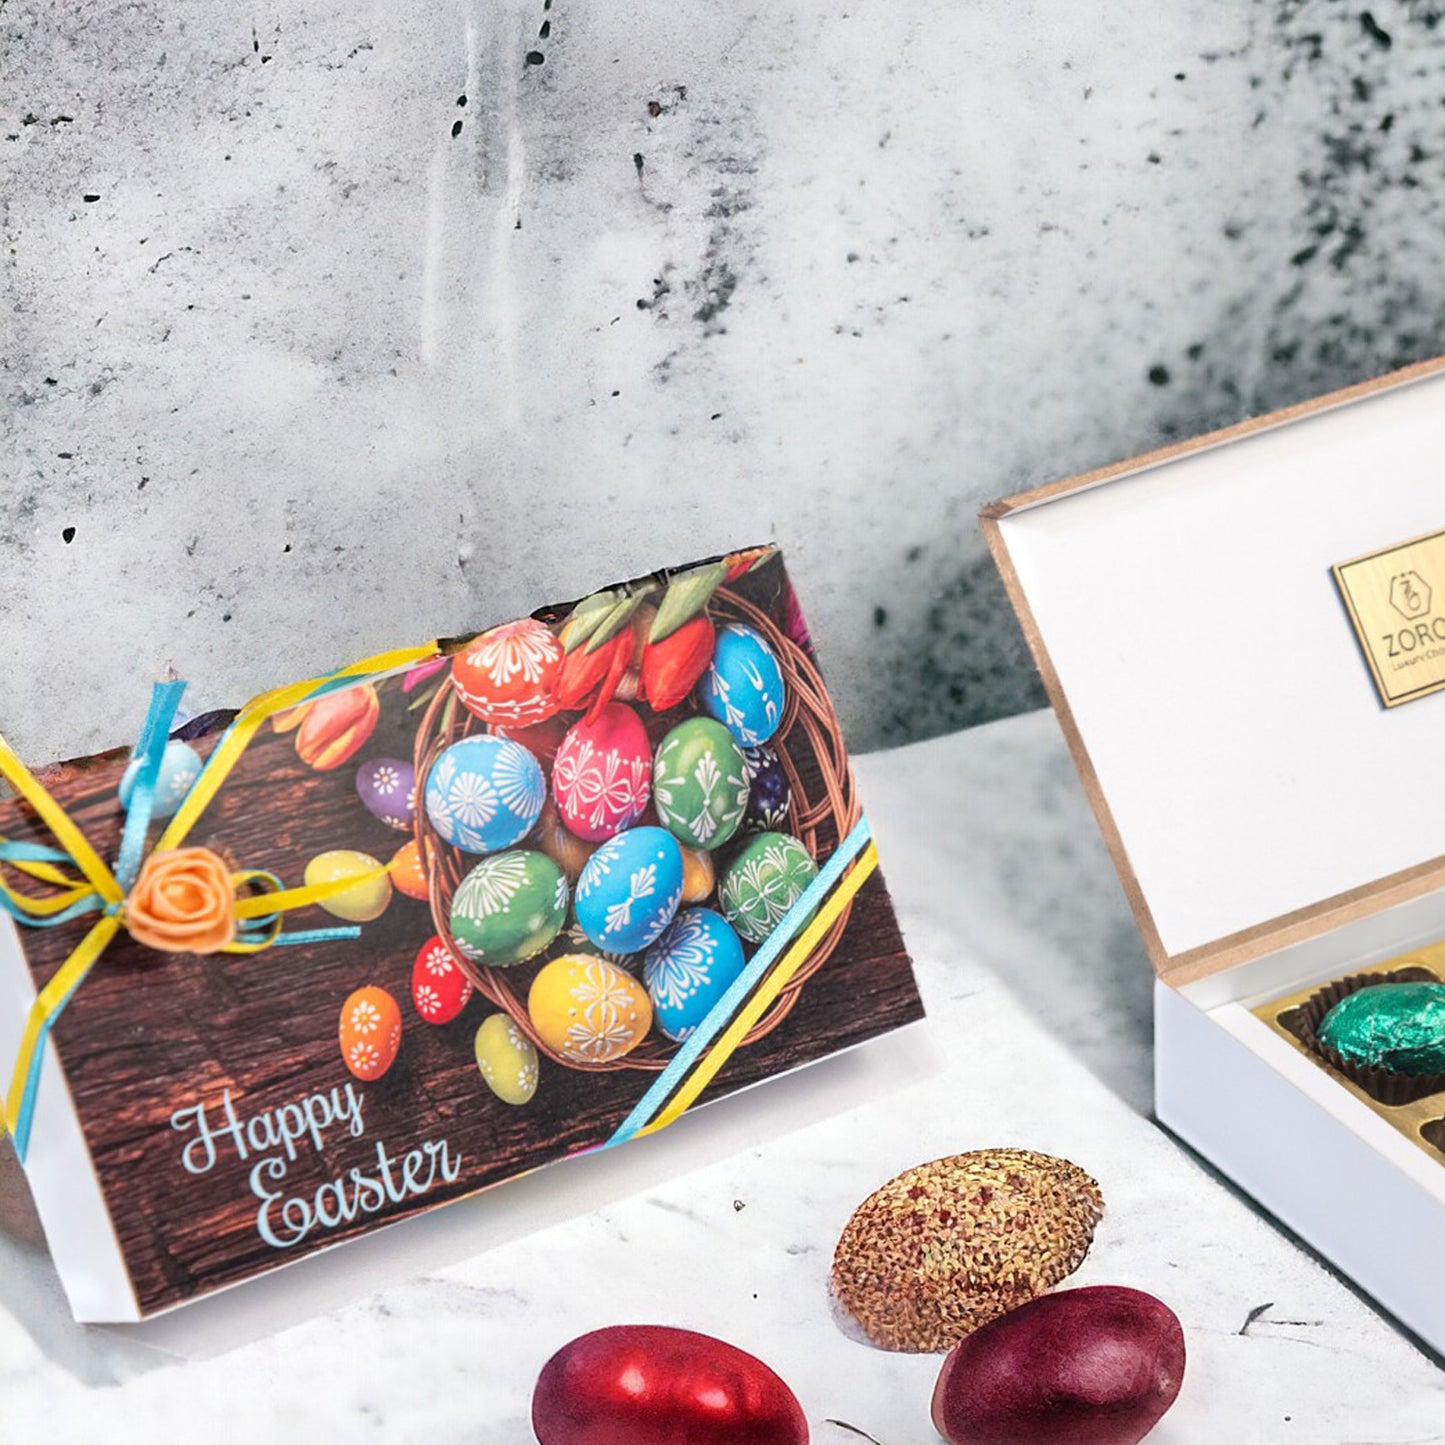 ZOROY Easter Message Wooden Box of 6 chocolate Eggs Gift Box - 66 Gms